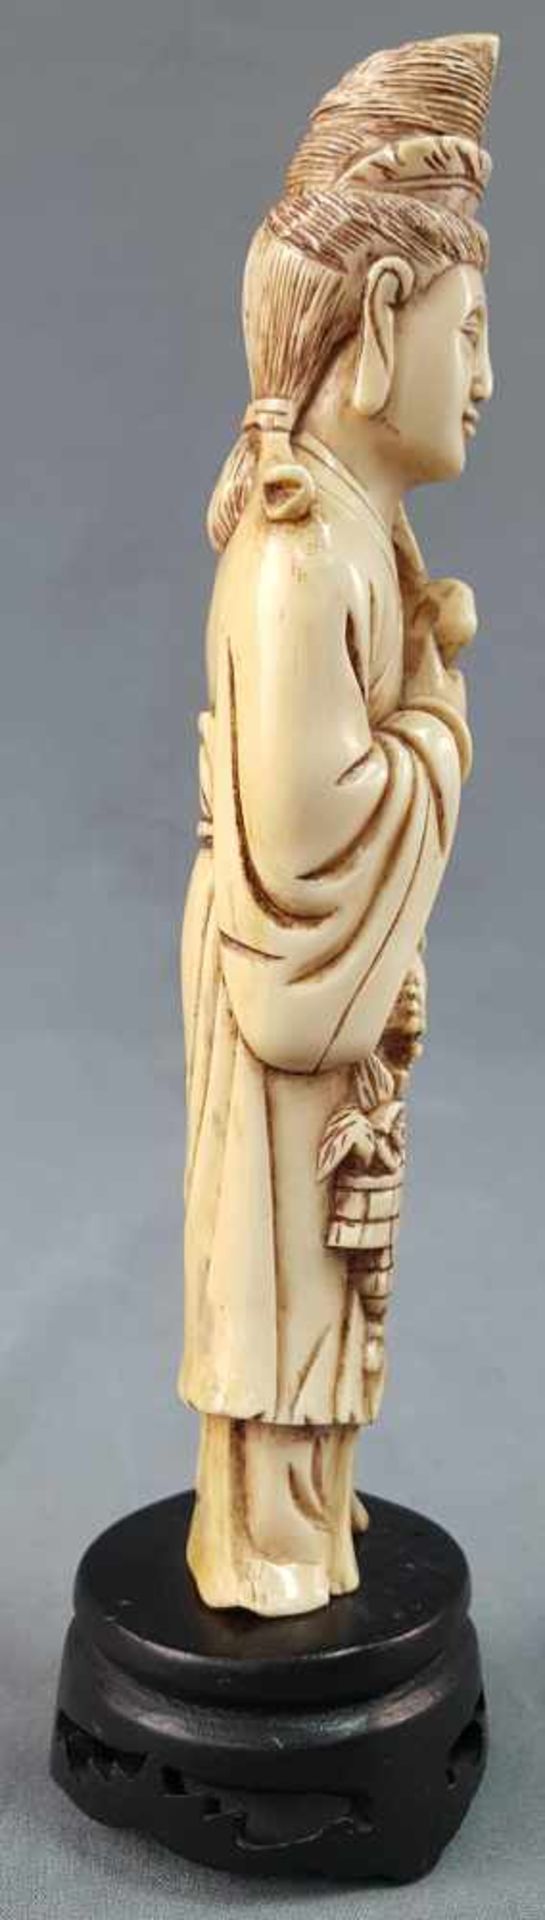 Lady with flowers. East Asia. China / Japan? Ivory. Old, around 1920. - Bild 4 aus 6